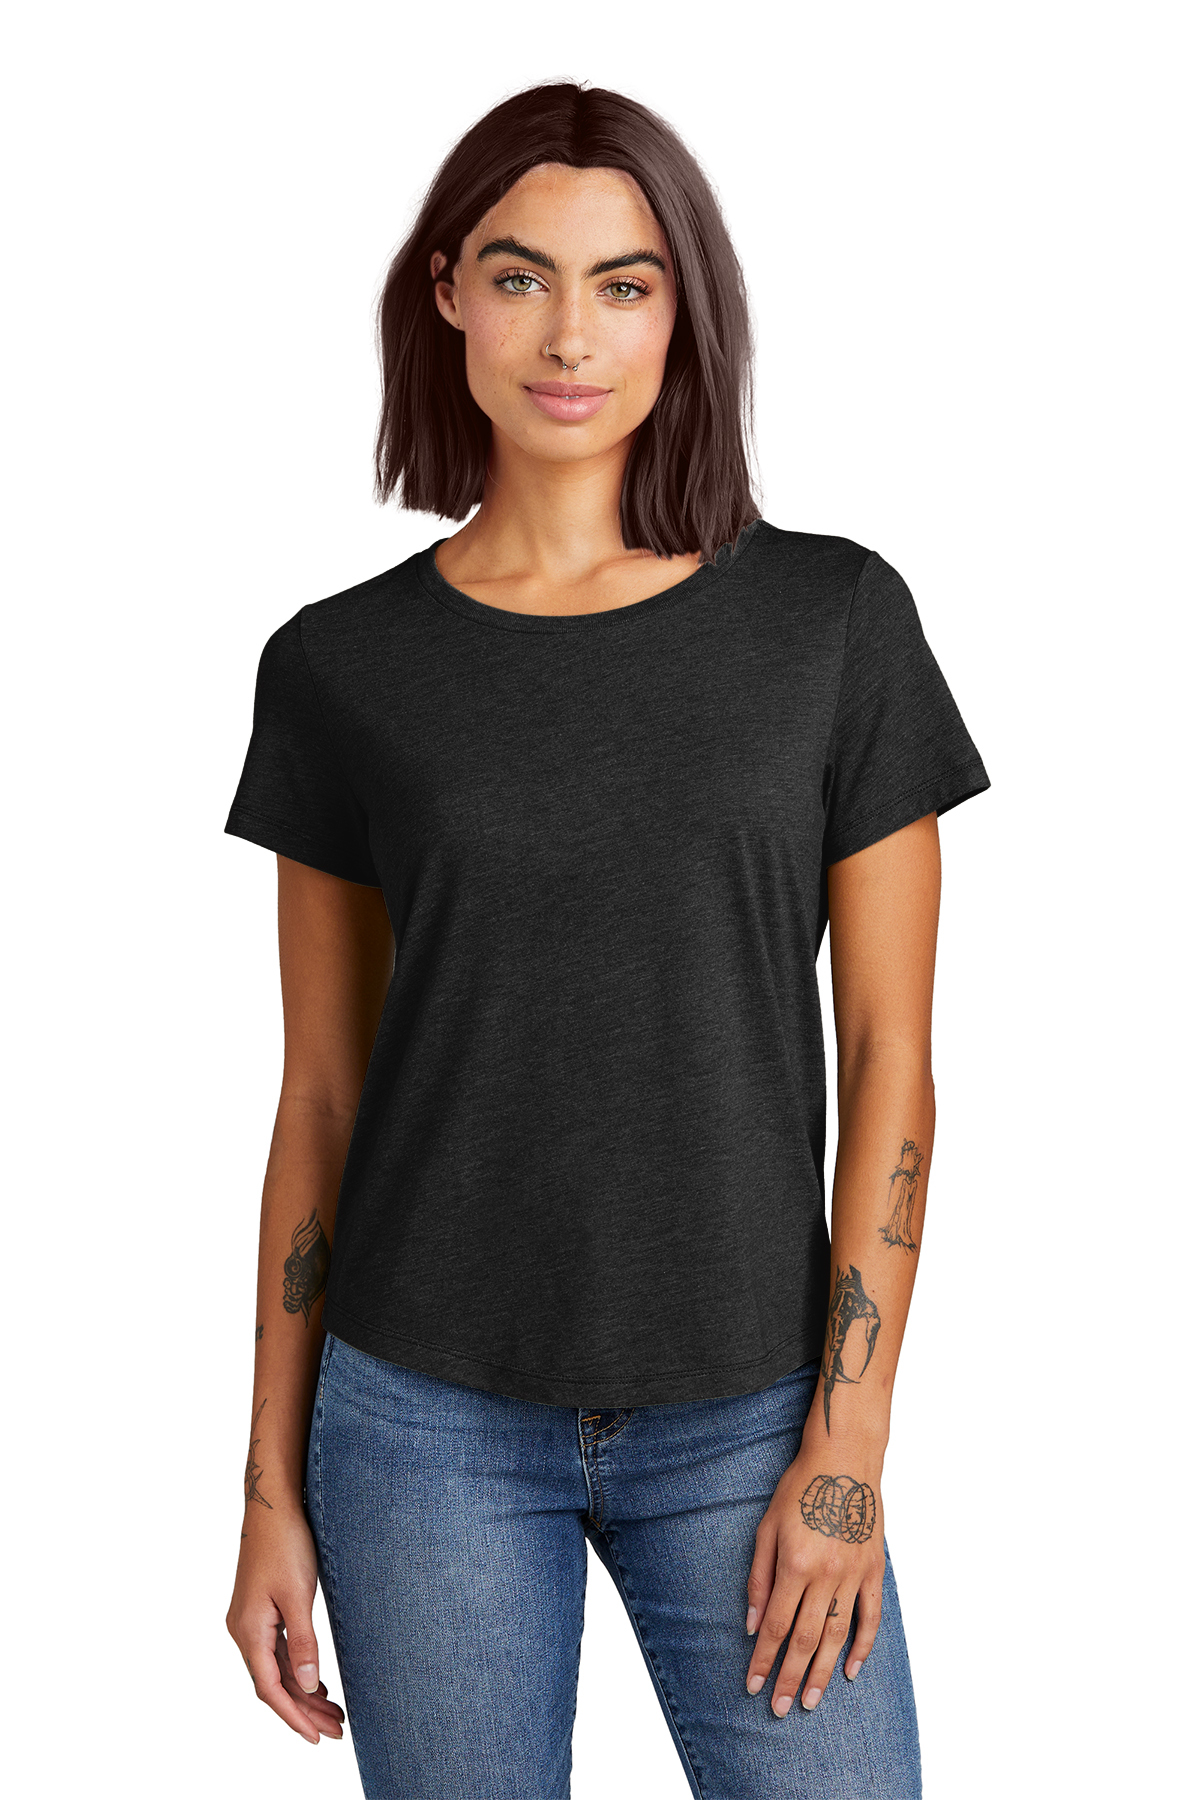 Allmade Women’s Relaxed Tri-Blend Scoop Neck Tee | Product | Company ...